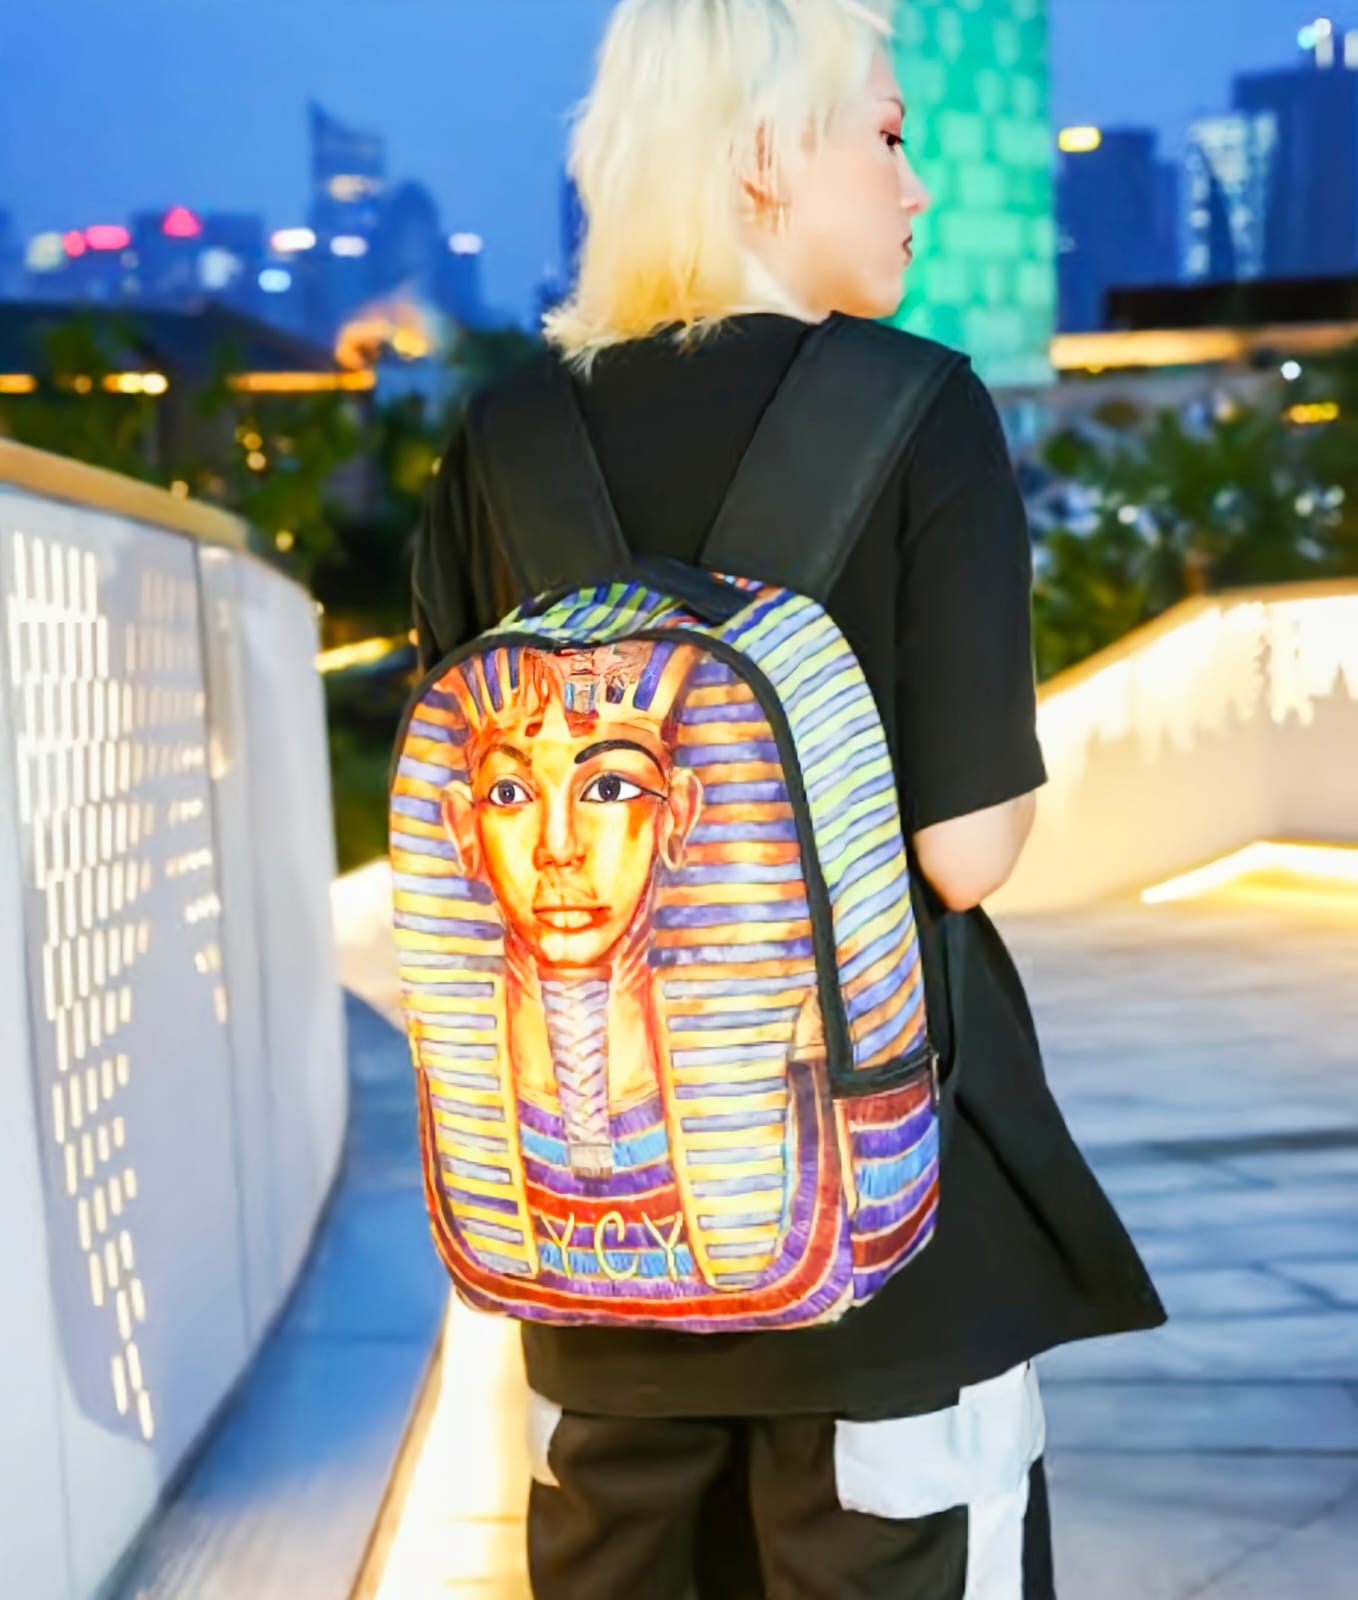 ANCIENT EGYPTIAN KING TUT BACKPACK